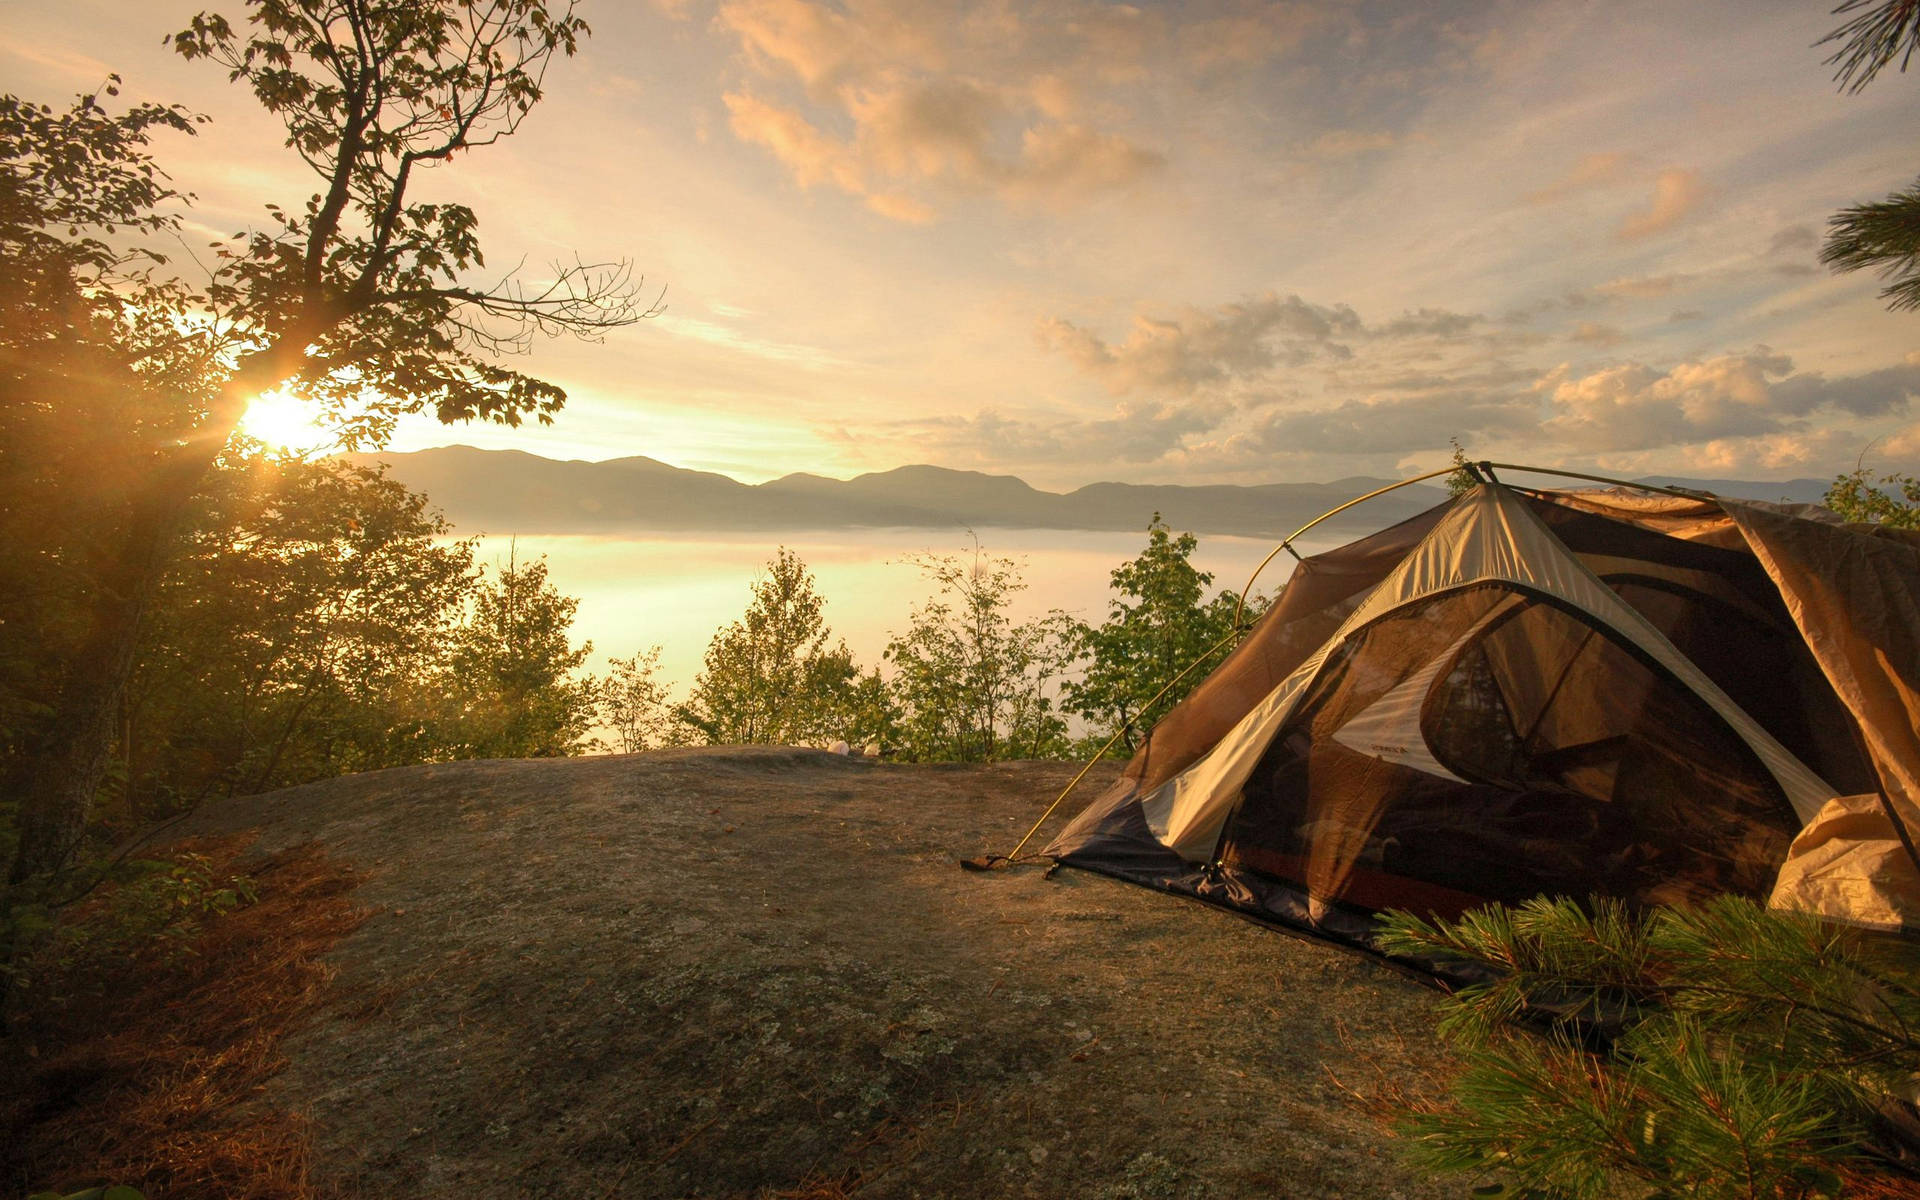 https://wallpapers.com/images/hd/outdoor-camping-cb9hpazvr95cwn4u.jpg